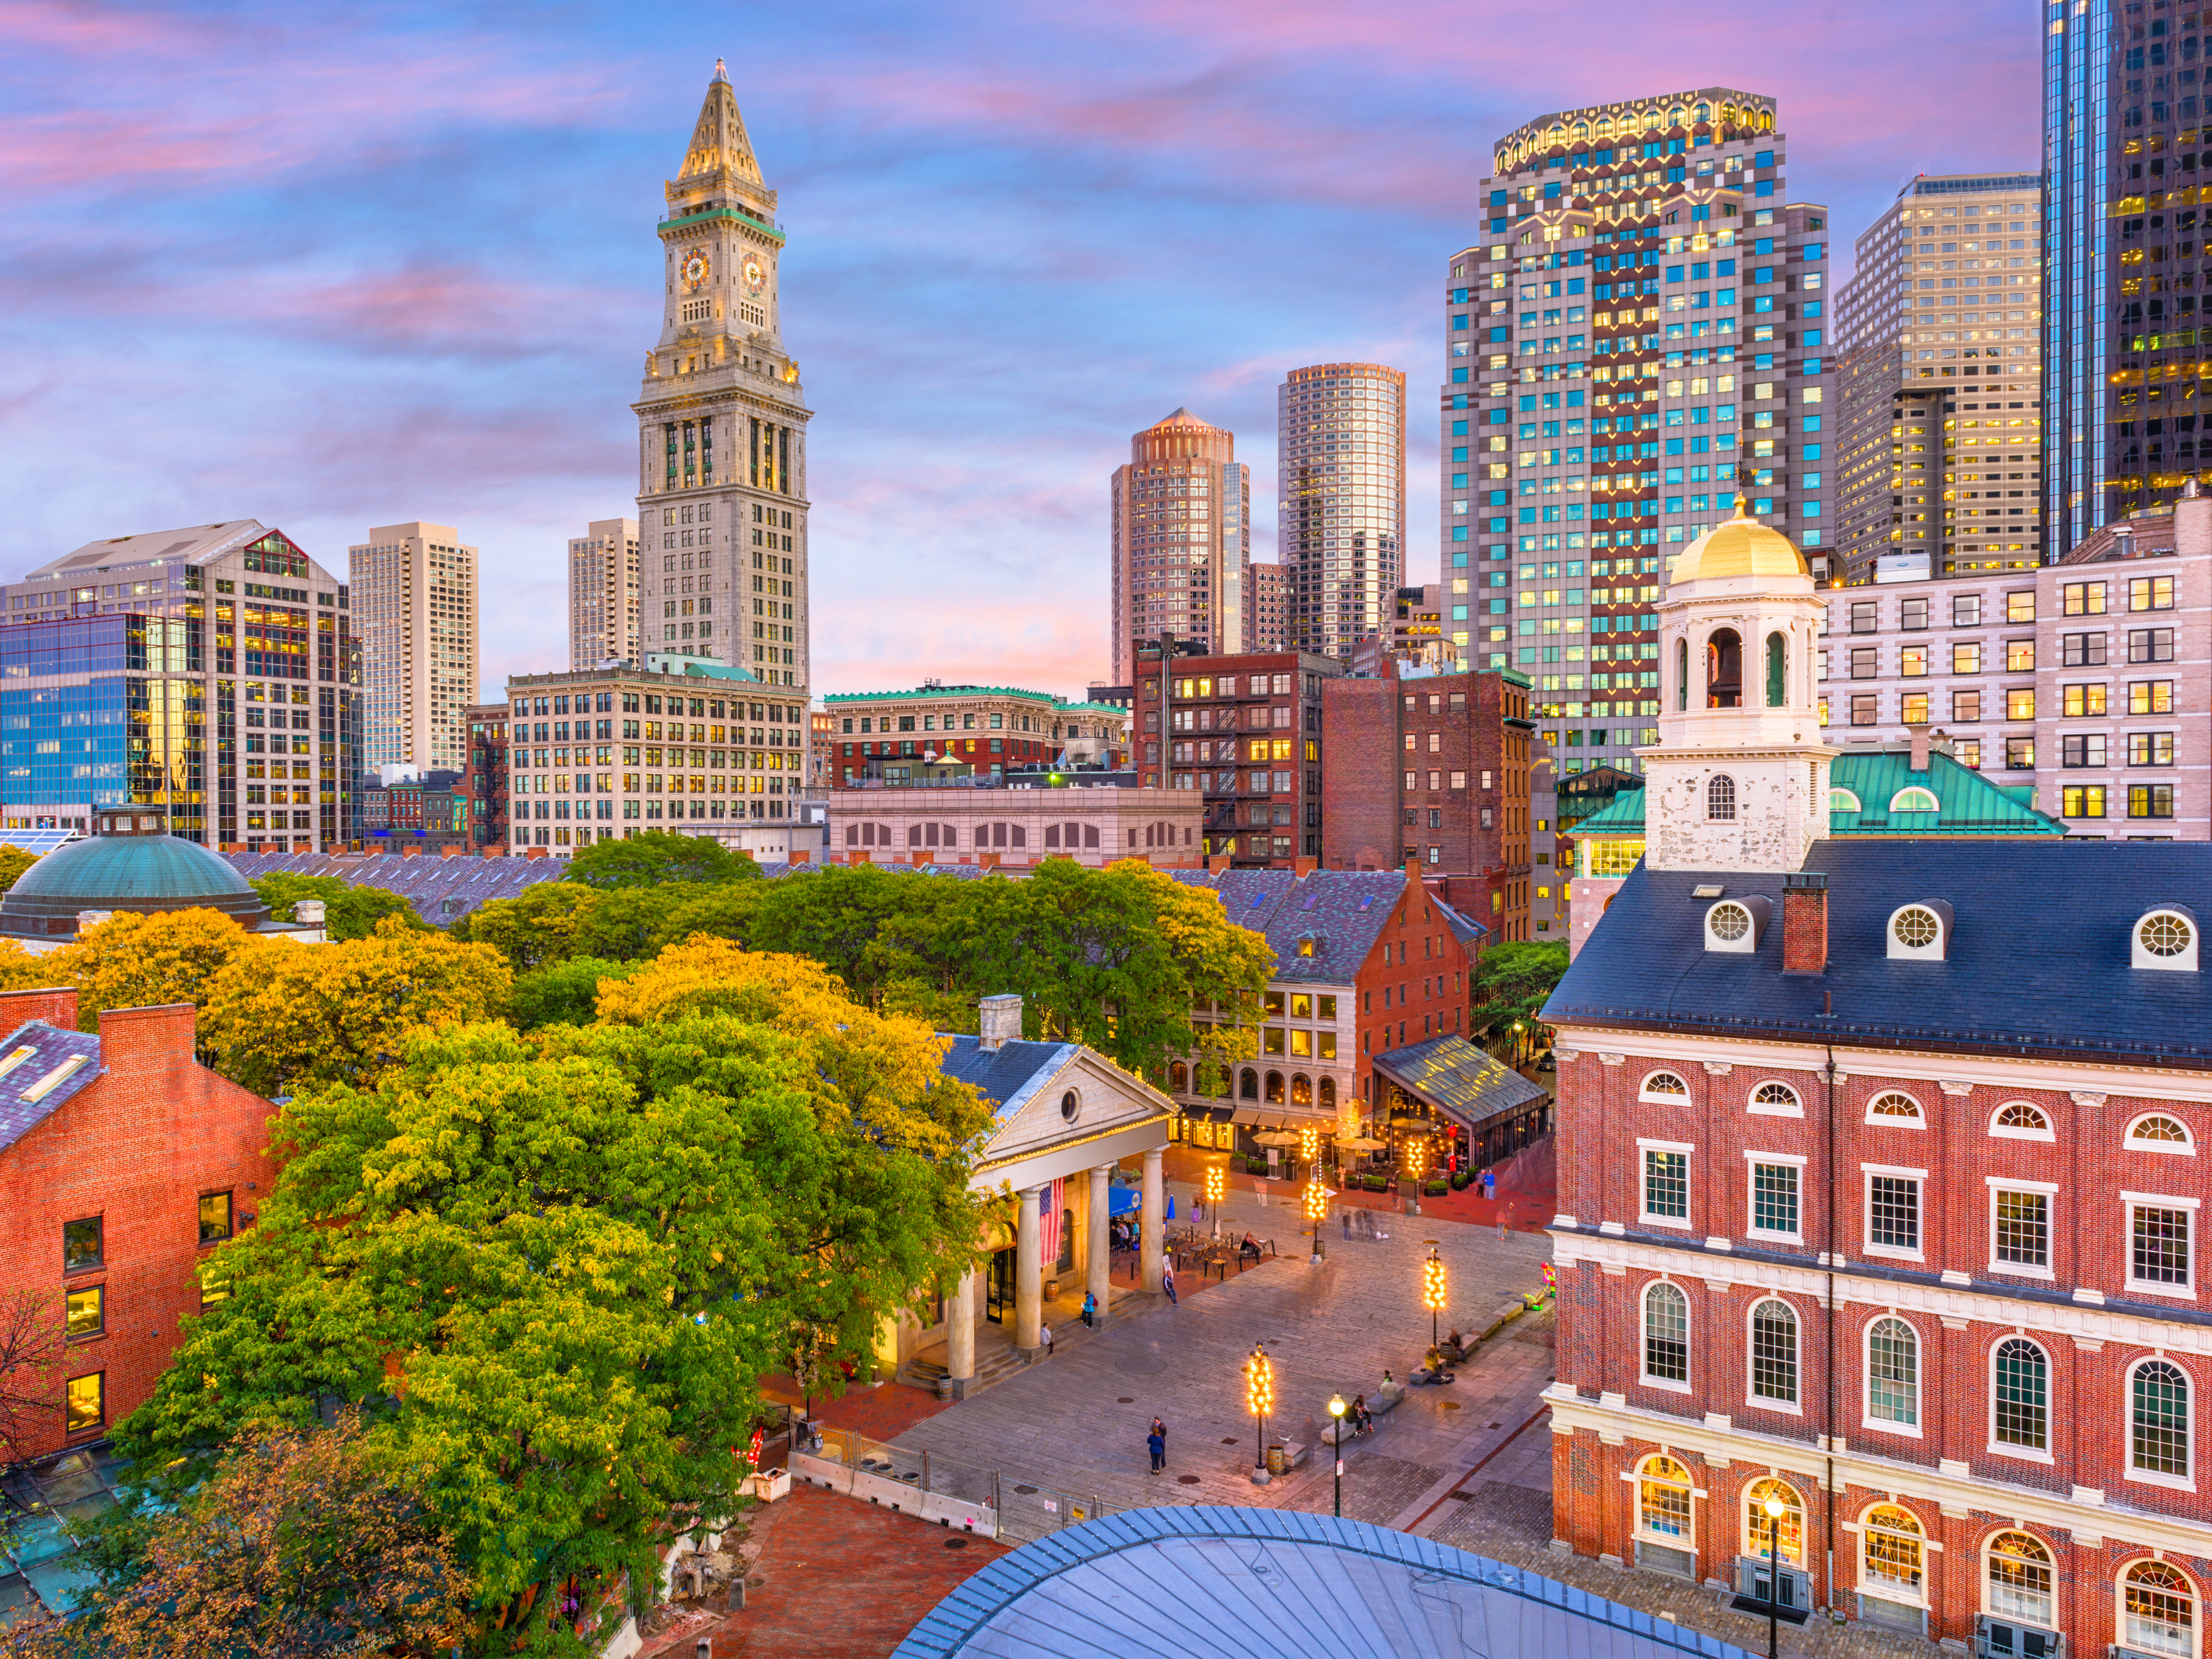 aerial view of boston massachusetts in evening hours